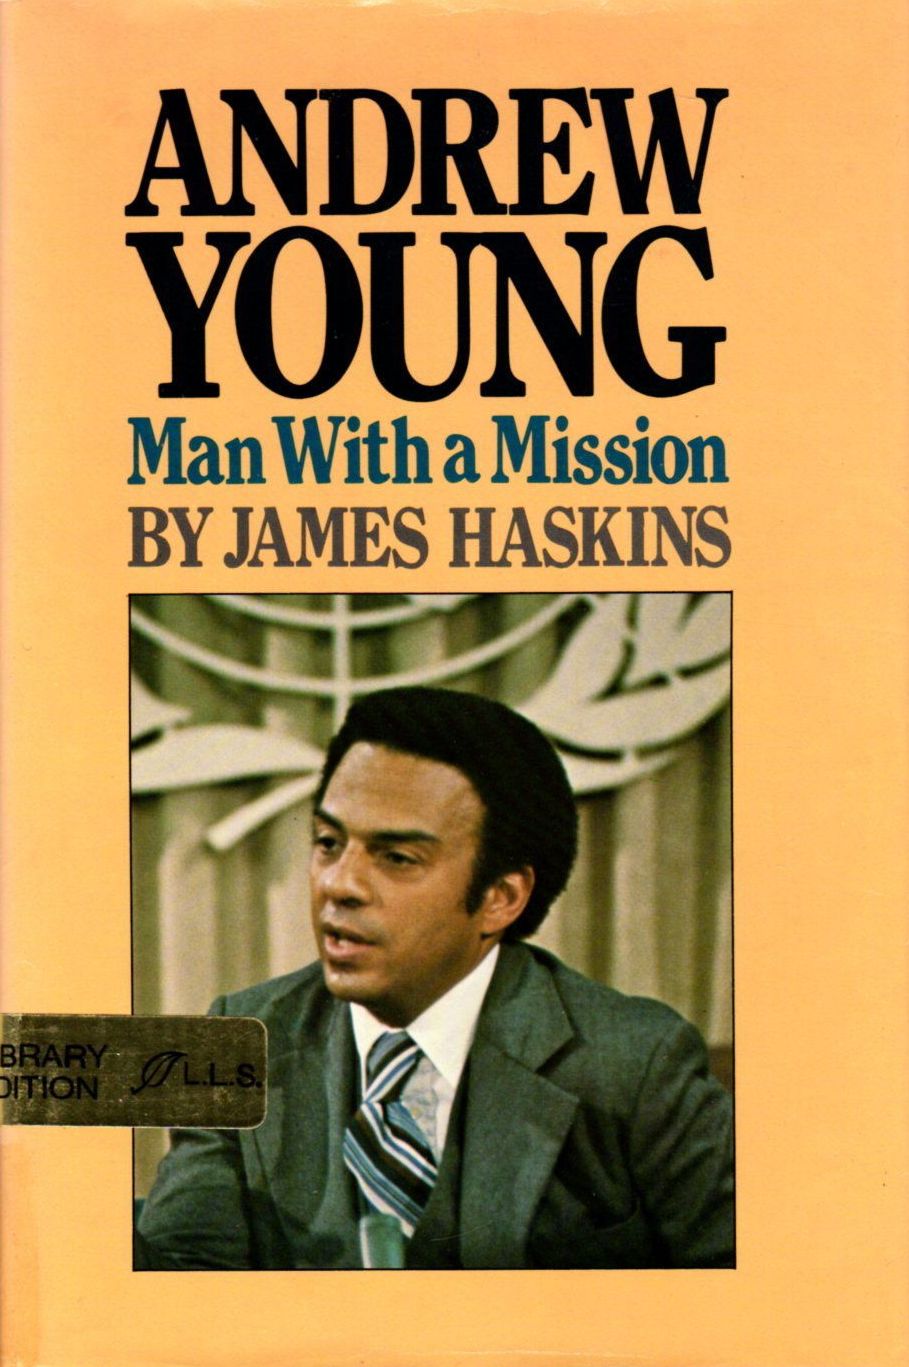 Book Cover Image of Andrew Young, Man With a Mission by James Haskins